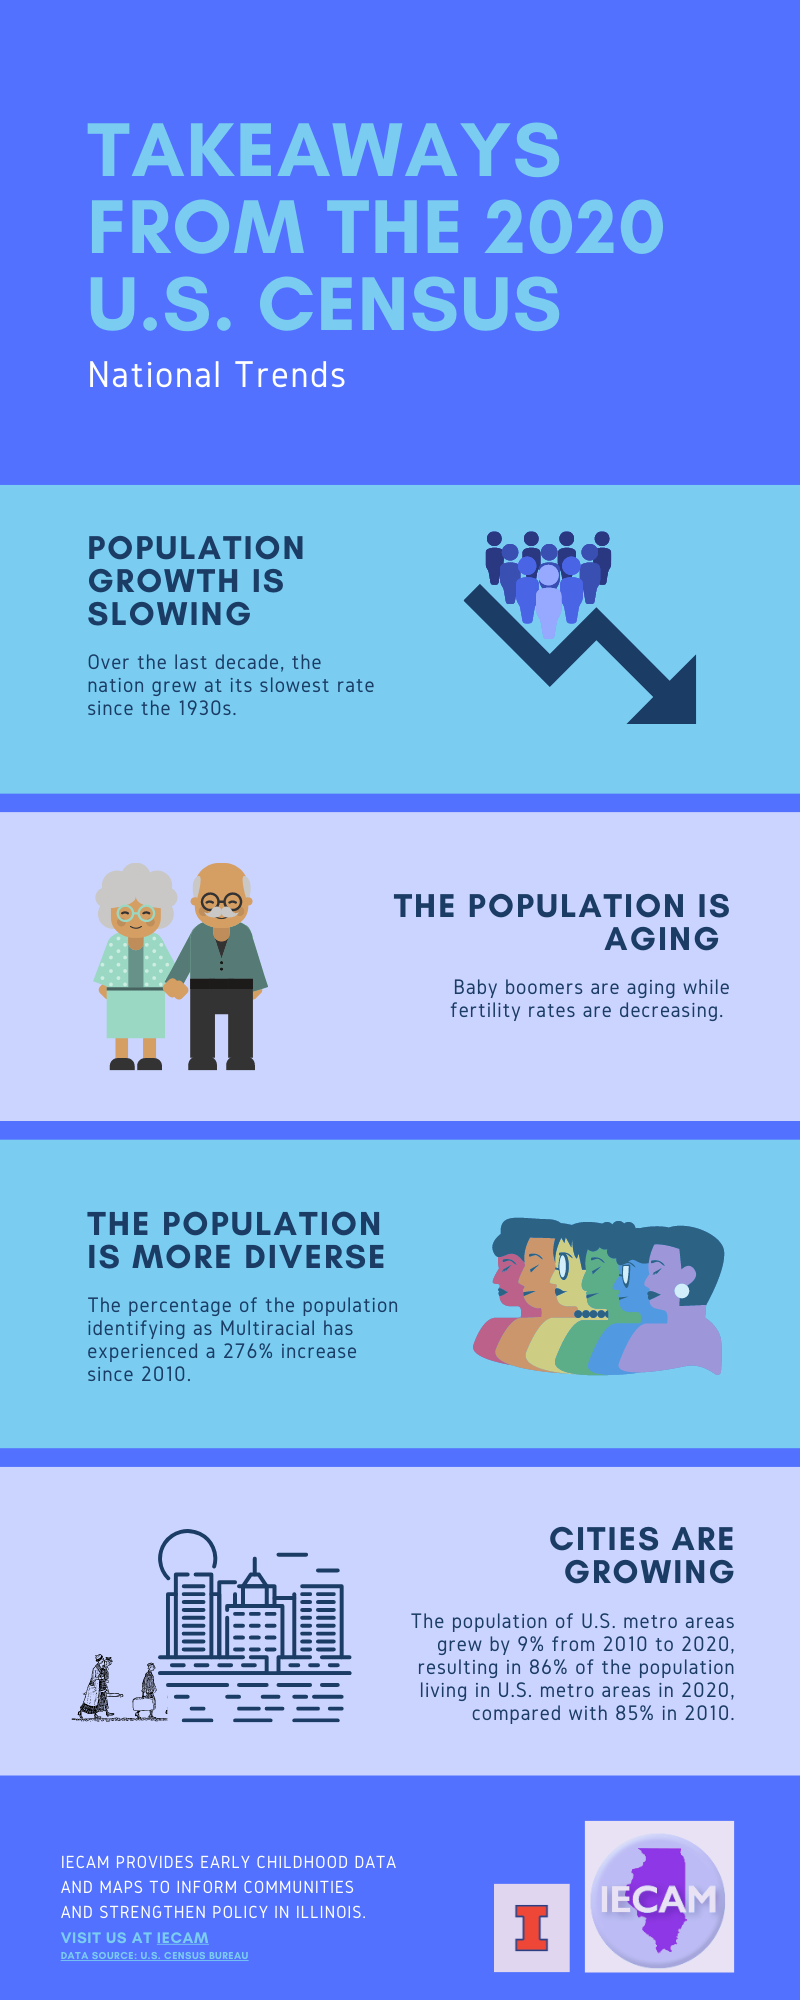 Takeaways from the 2020 U.S. Census: National Trends: population growth is slowing, population is aging, population is more diverse, cities are growing.